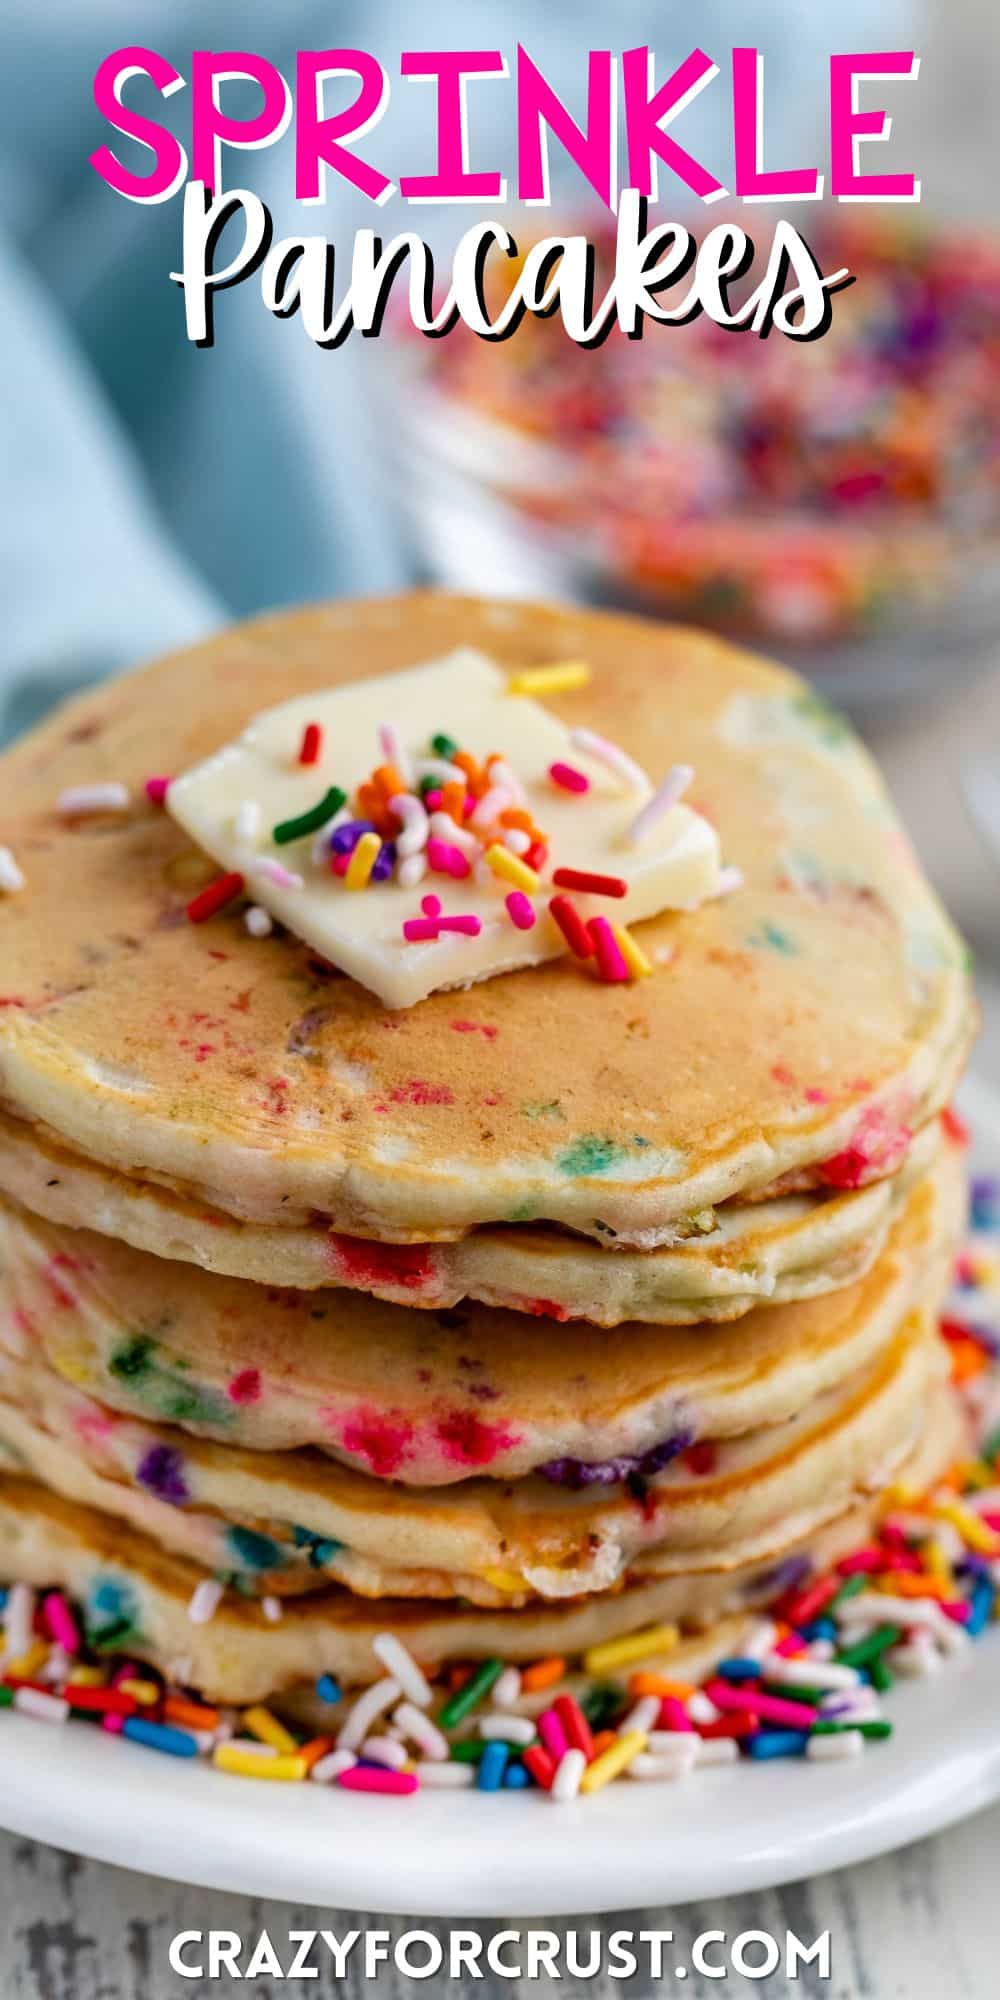 stacked sprinkle pancakes with colorful sprinkles all around and baked in with butter on top with words on the image.